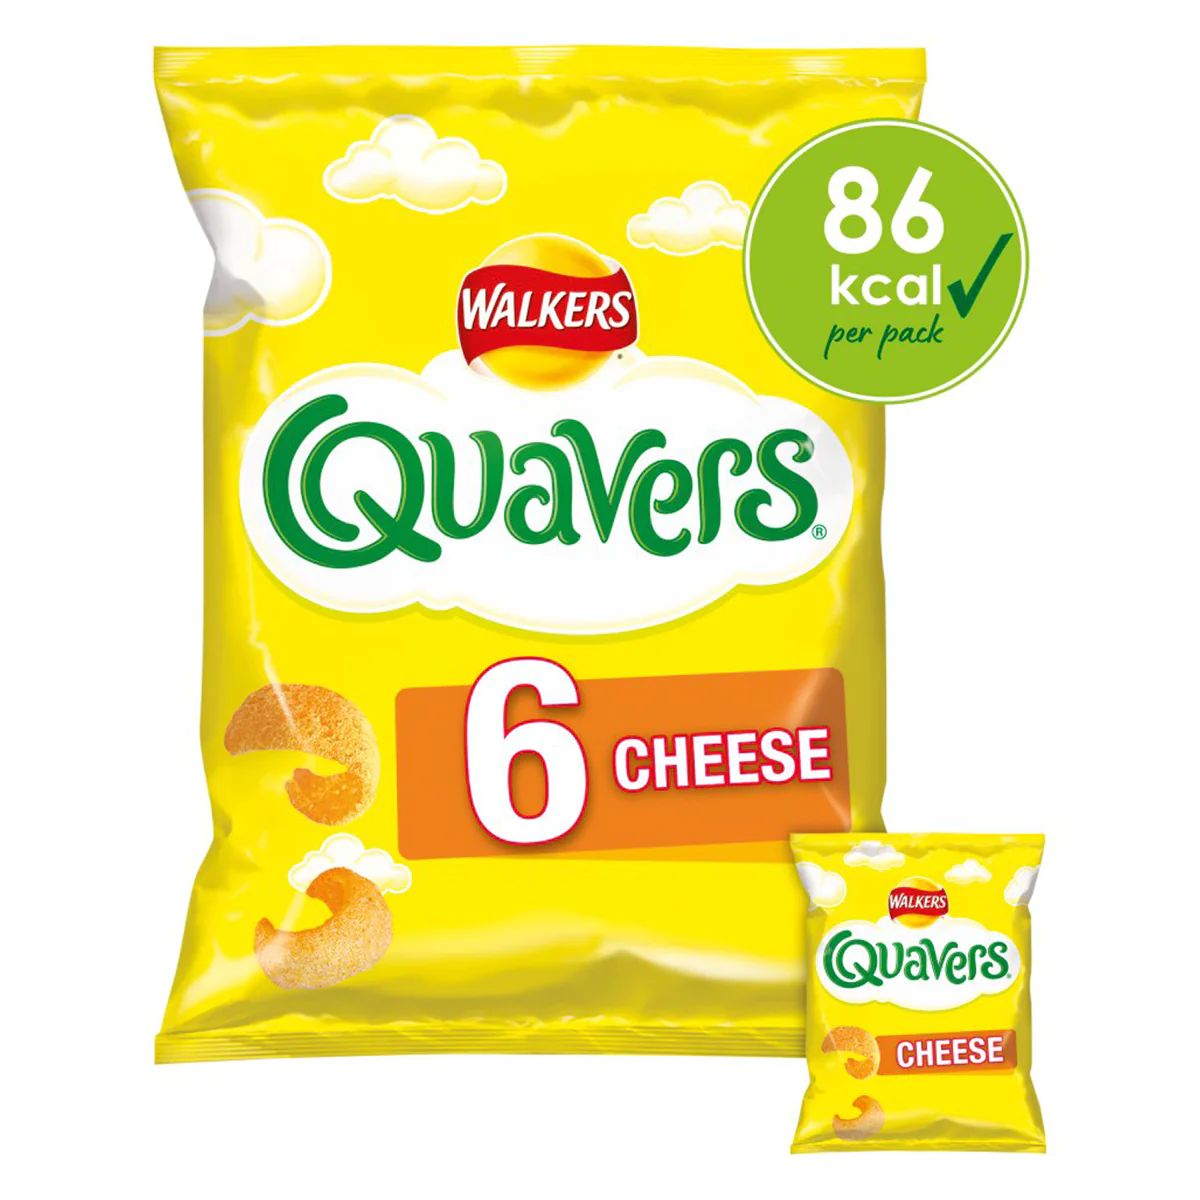 Pack of Walkers - Quavers Cheese Snacks - 6x16g, highlighting 86 kcal per pack.